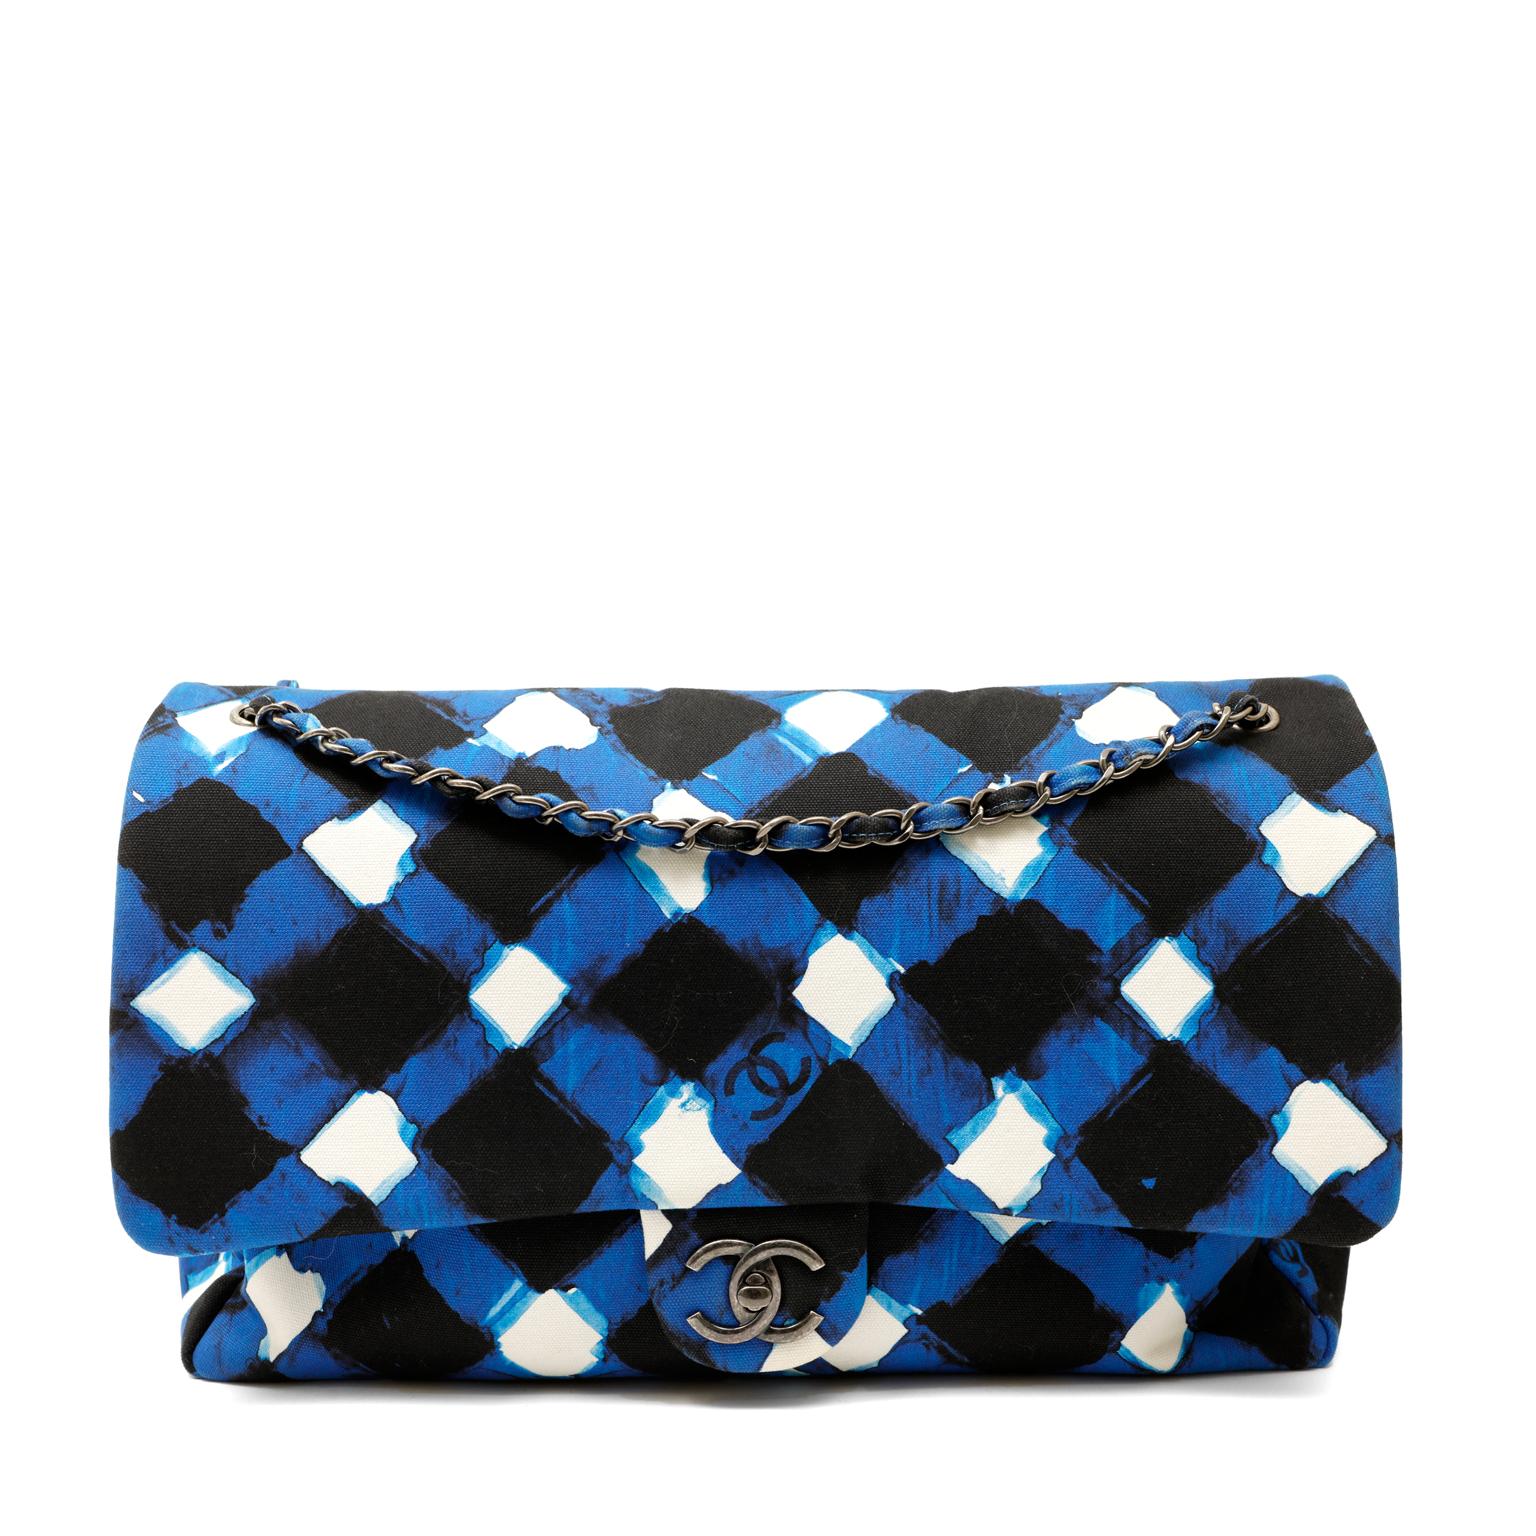 This authentic Chanel Plaid Airline Travel Canvas Flap Bag is a runway piece in pristine condition.  The extra-large silhouette paired with blue plaid printed canvas makes this Chanel especially collectible.  
Plaid treated canvas in cobalt blue,